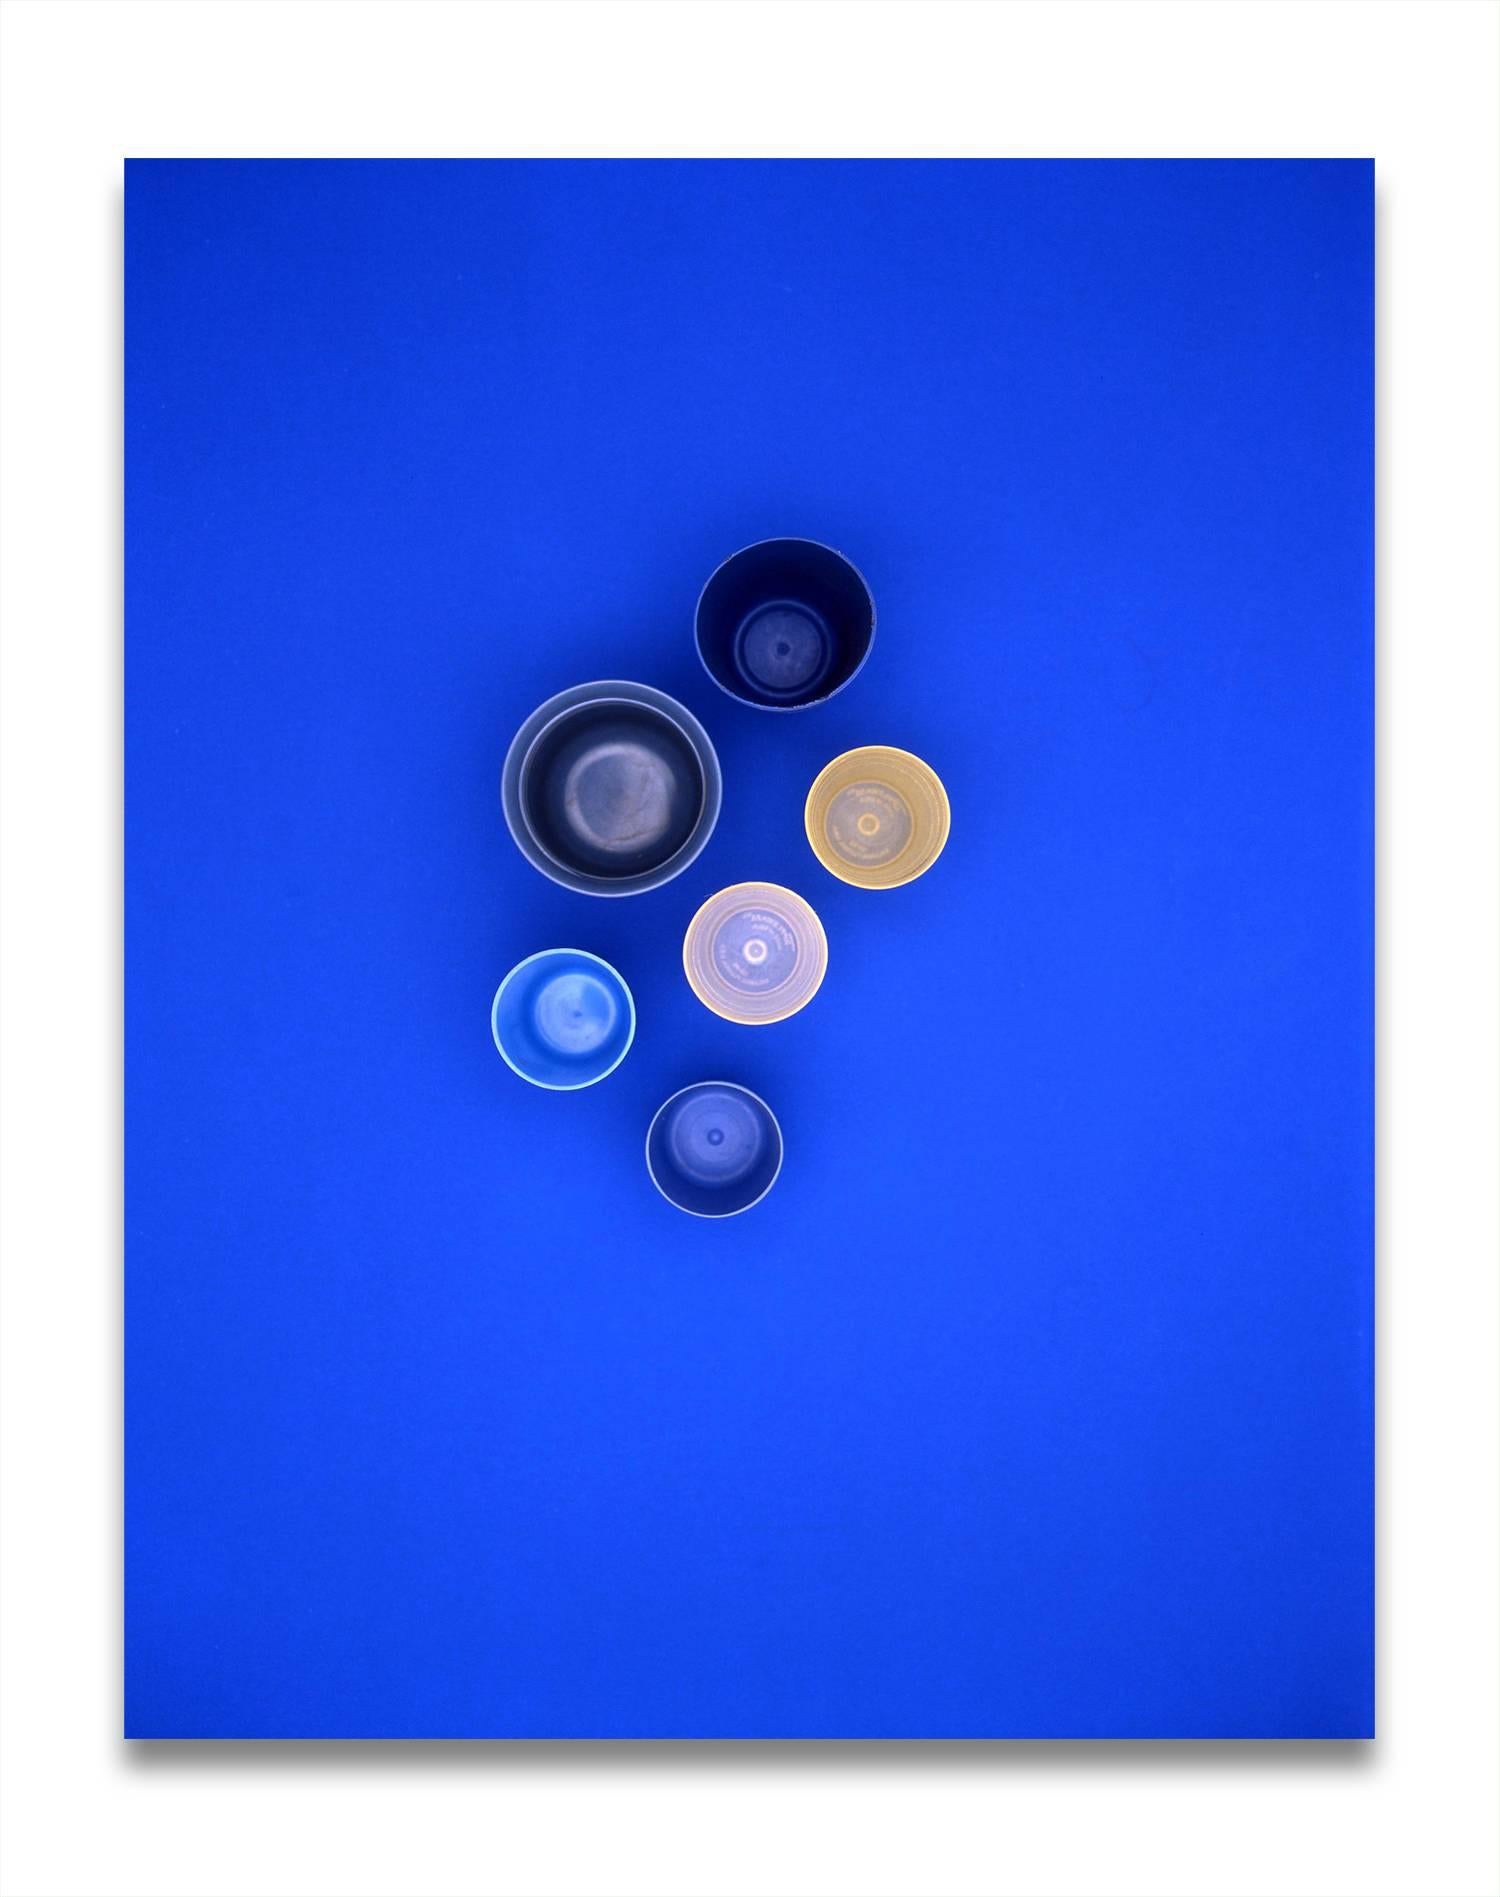 Untitled 110/3 (Abstract Photography)

C Print. Unframed.

Richard Caldicott is most well known for this earlier work series which used Tupperware containers as the subject for his photographs. This work is edition 6 of 15.

As he describes :